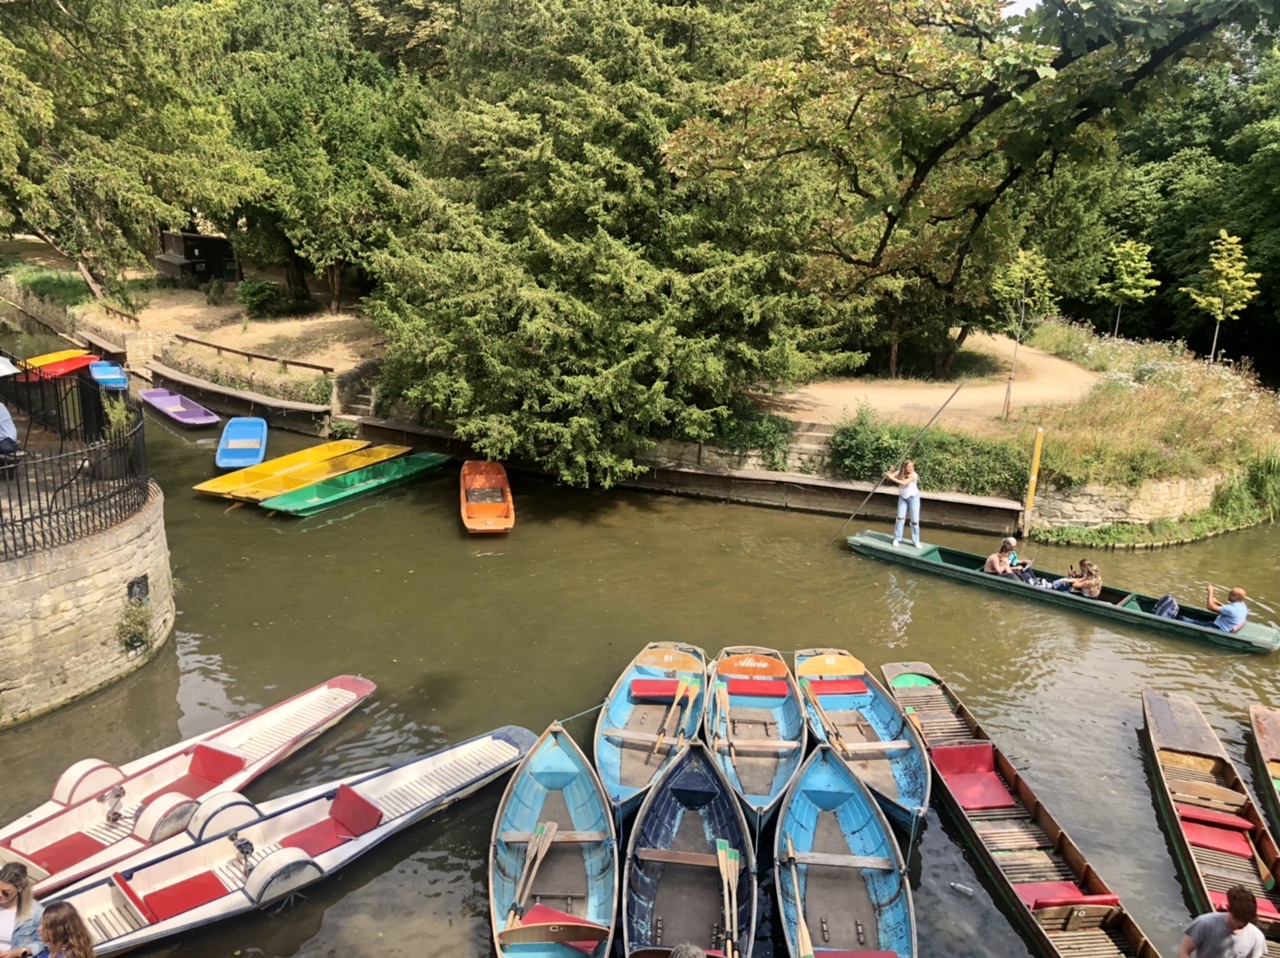 Group of four people punting in Oxford with numberous empty boats lined up along river edge